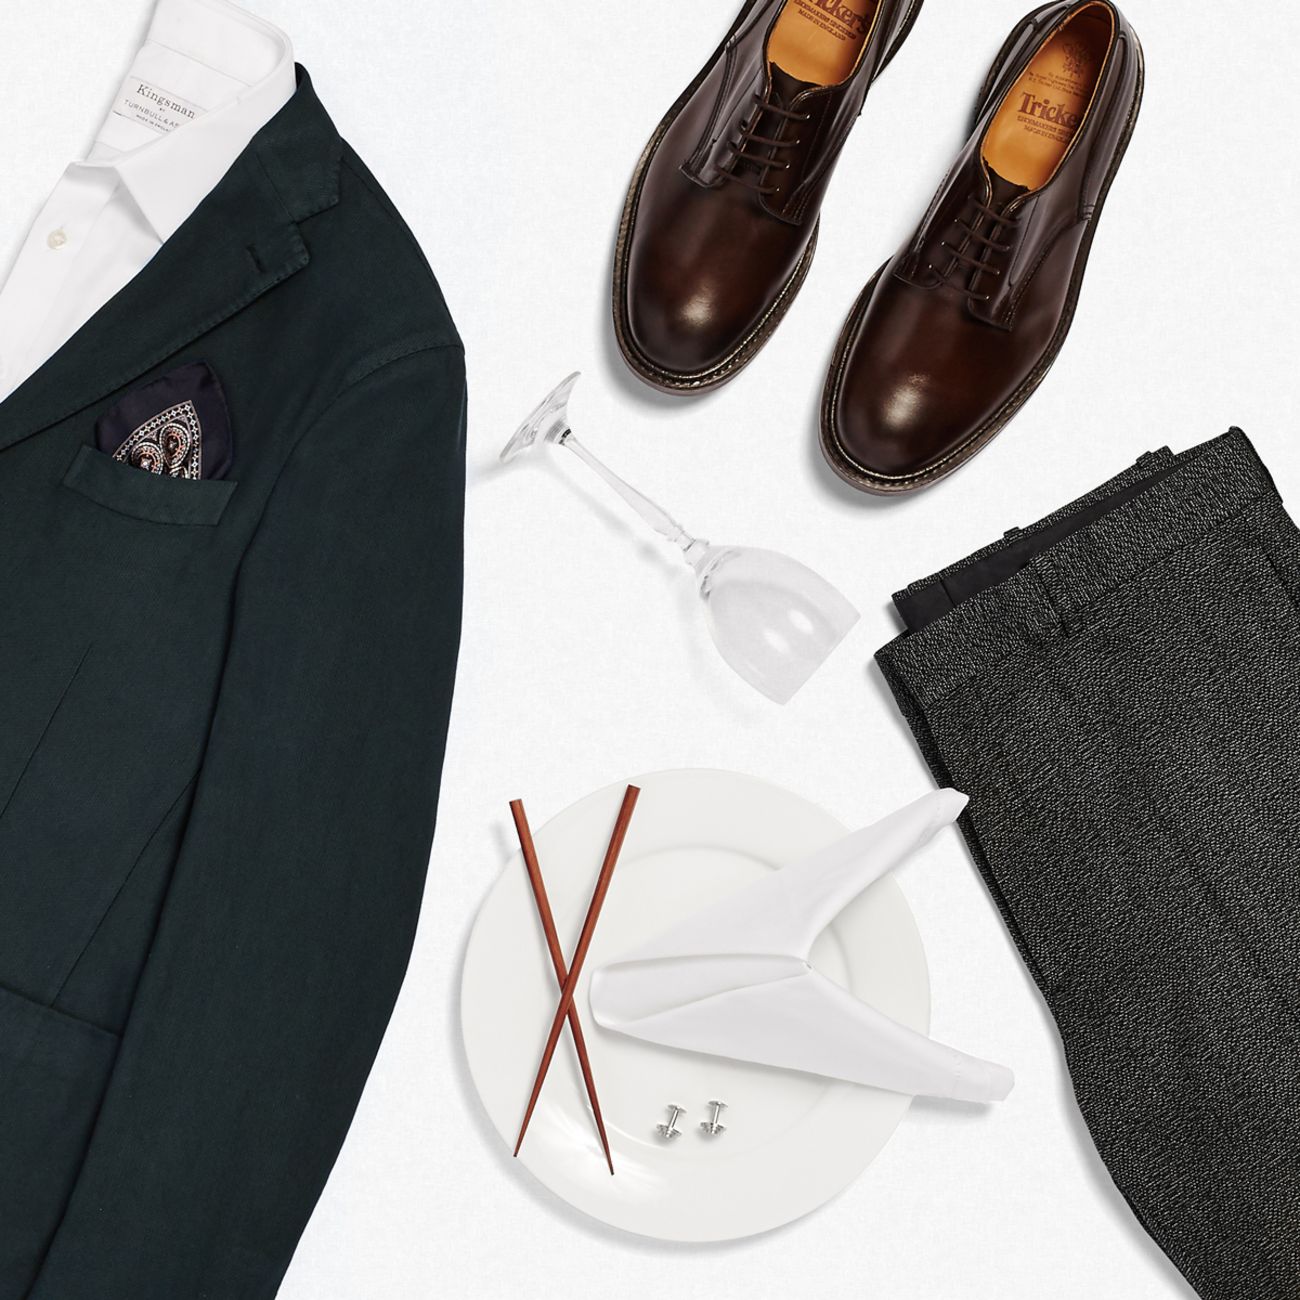 What To Wear To A Fancy Restaurant | The Journal | MR PORTER